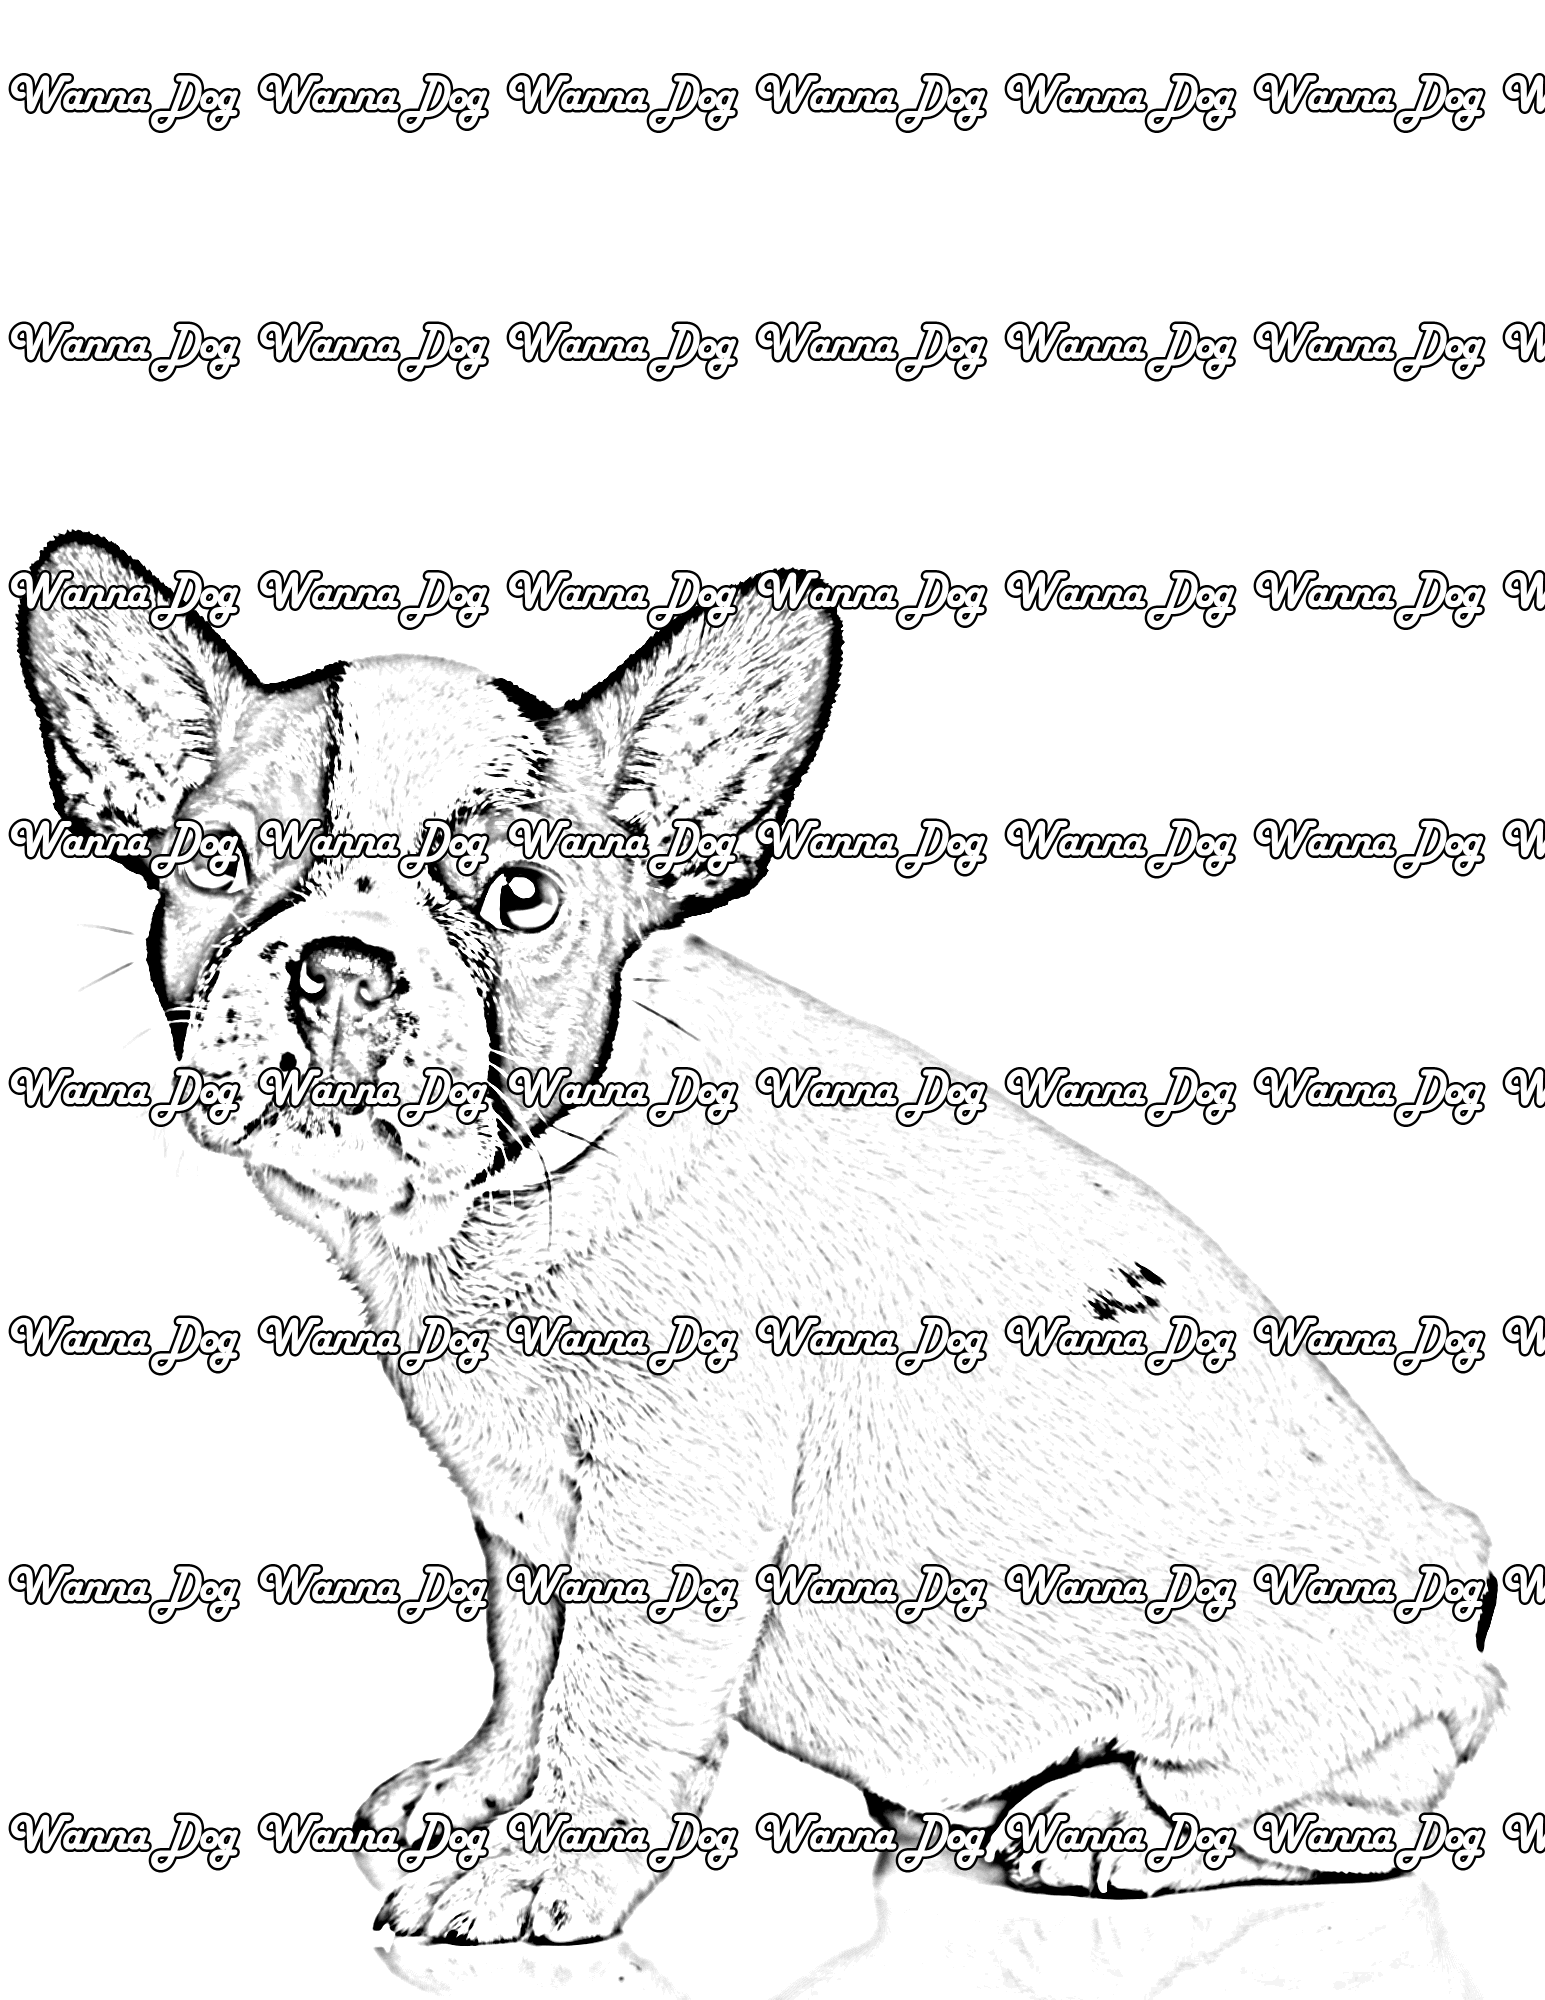 Bulldog Puppy Coloring Page of a Bulldog Puppy sitting and posing for the camera